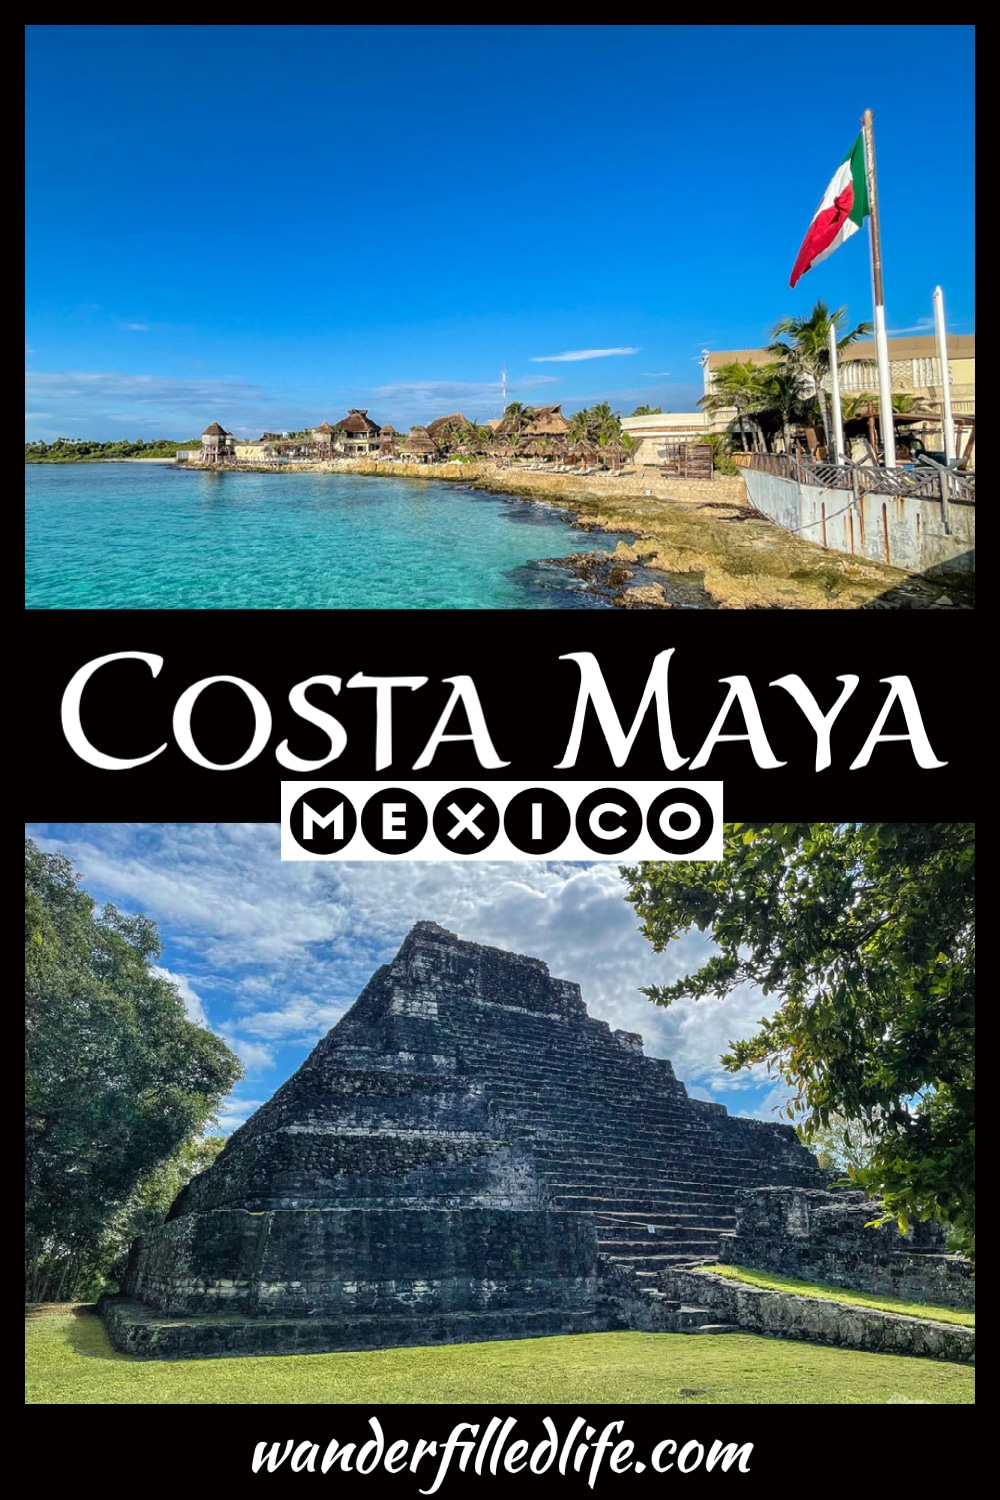 Our tips for visiting the Costa Maya, Mexico cruise port and how to enjoy a half-day excursion to the Chacchoben Mayan ruins or Aldea Mahahua.